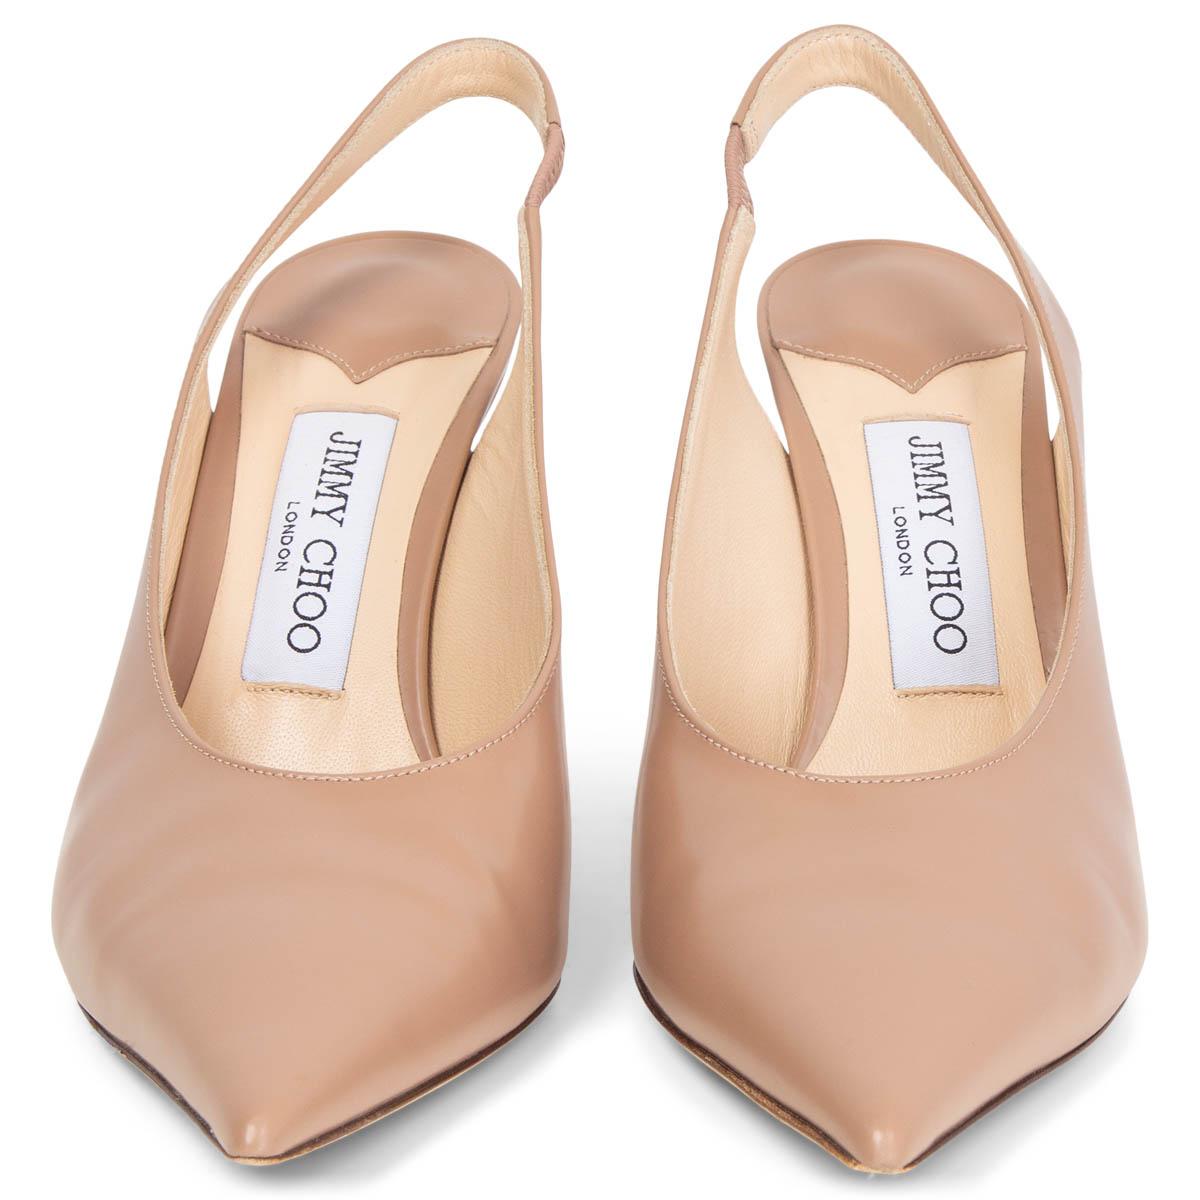 100% authentic Jimmy Choo Ivy 85 Slingback Pumps in nude leather. Have been worn once or twice and are in excellent condition. 

Measurements
Imprinted Size	37.5
Shoe Size	37.5
Inside Sole	24.5cm (9.6in)
Width	7cm (2.7in)
Heel	8.5cm (3.3in)

All our